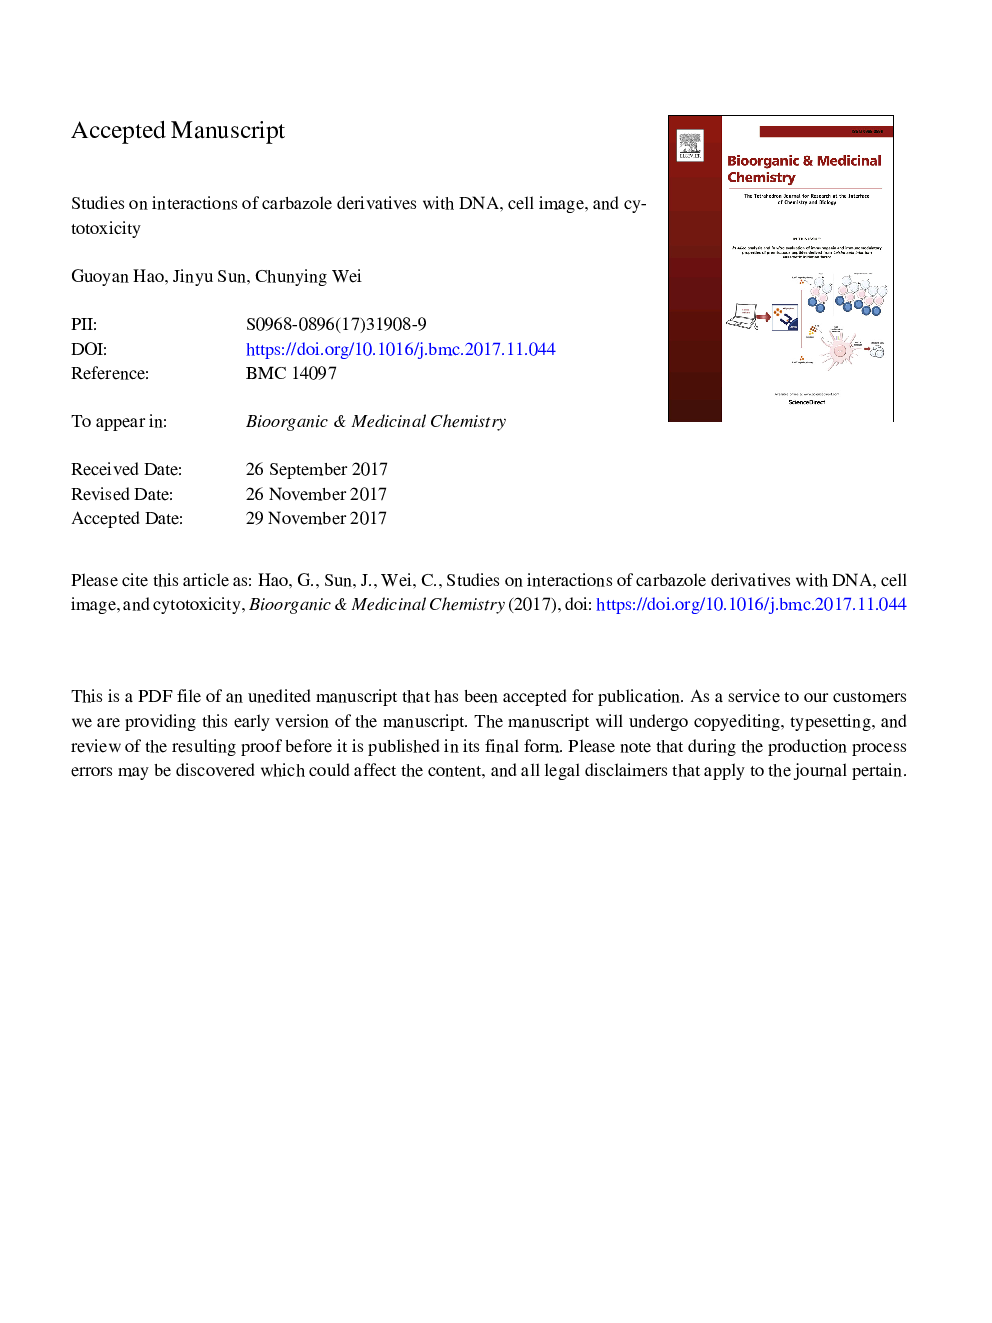 Studies on interactions of carbazole derivatives with DNA, cell image, and cytotoxicity